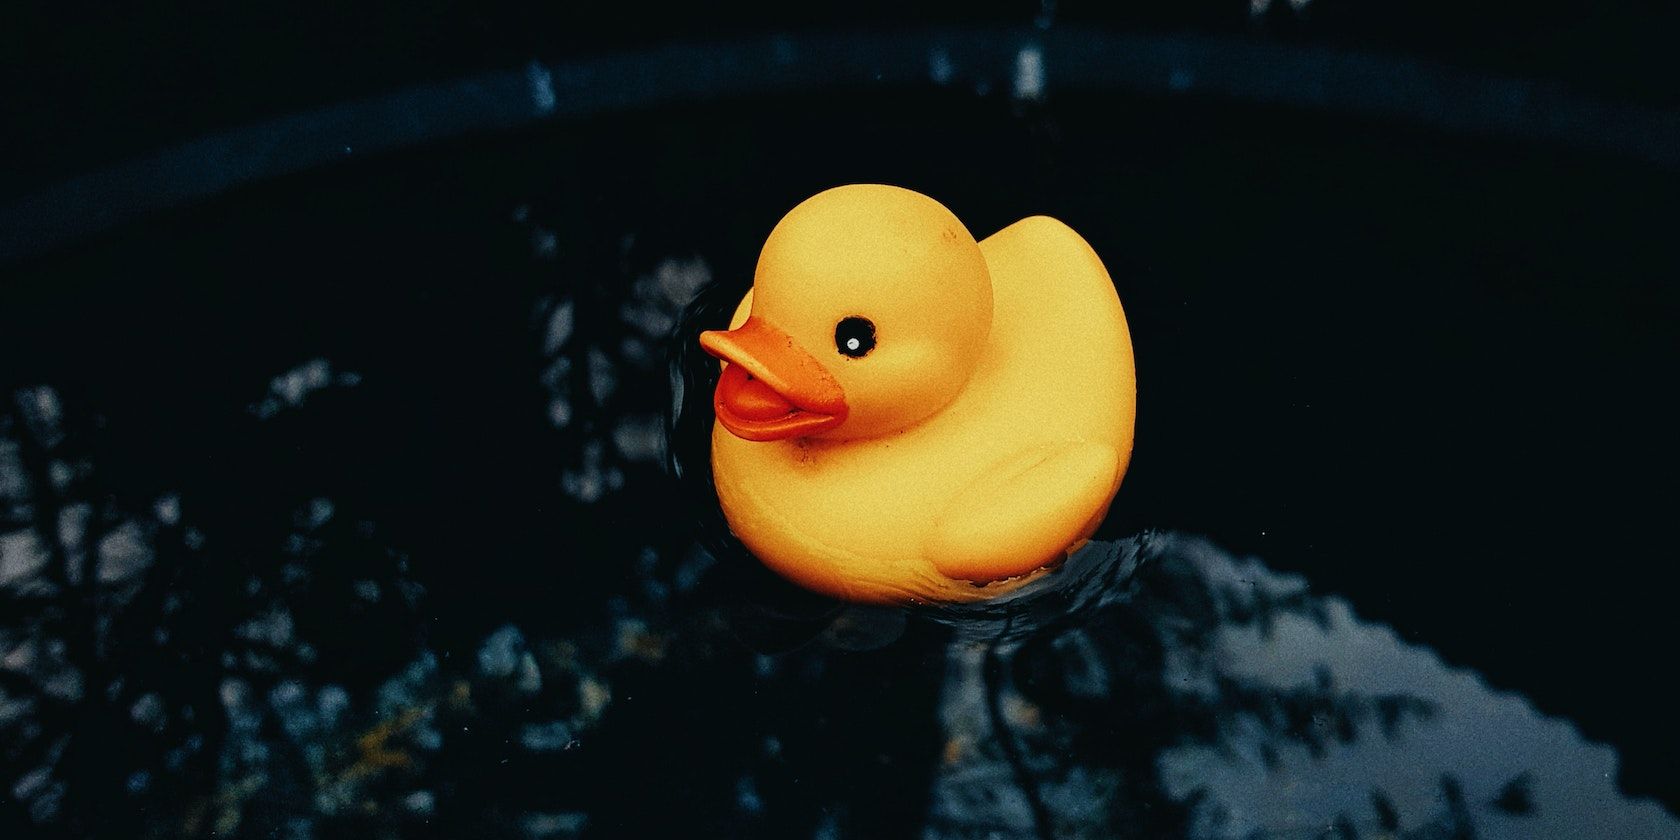 rubber ducky floating on a dark body of water